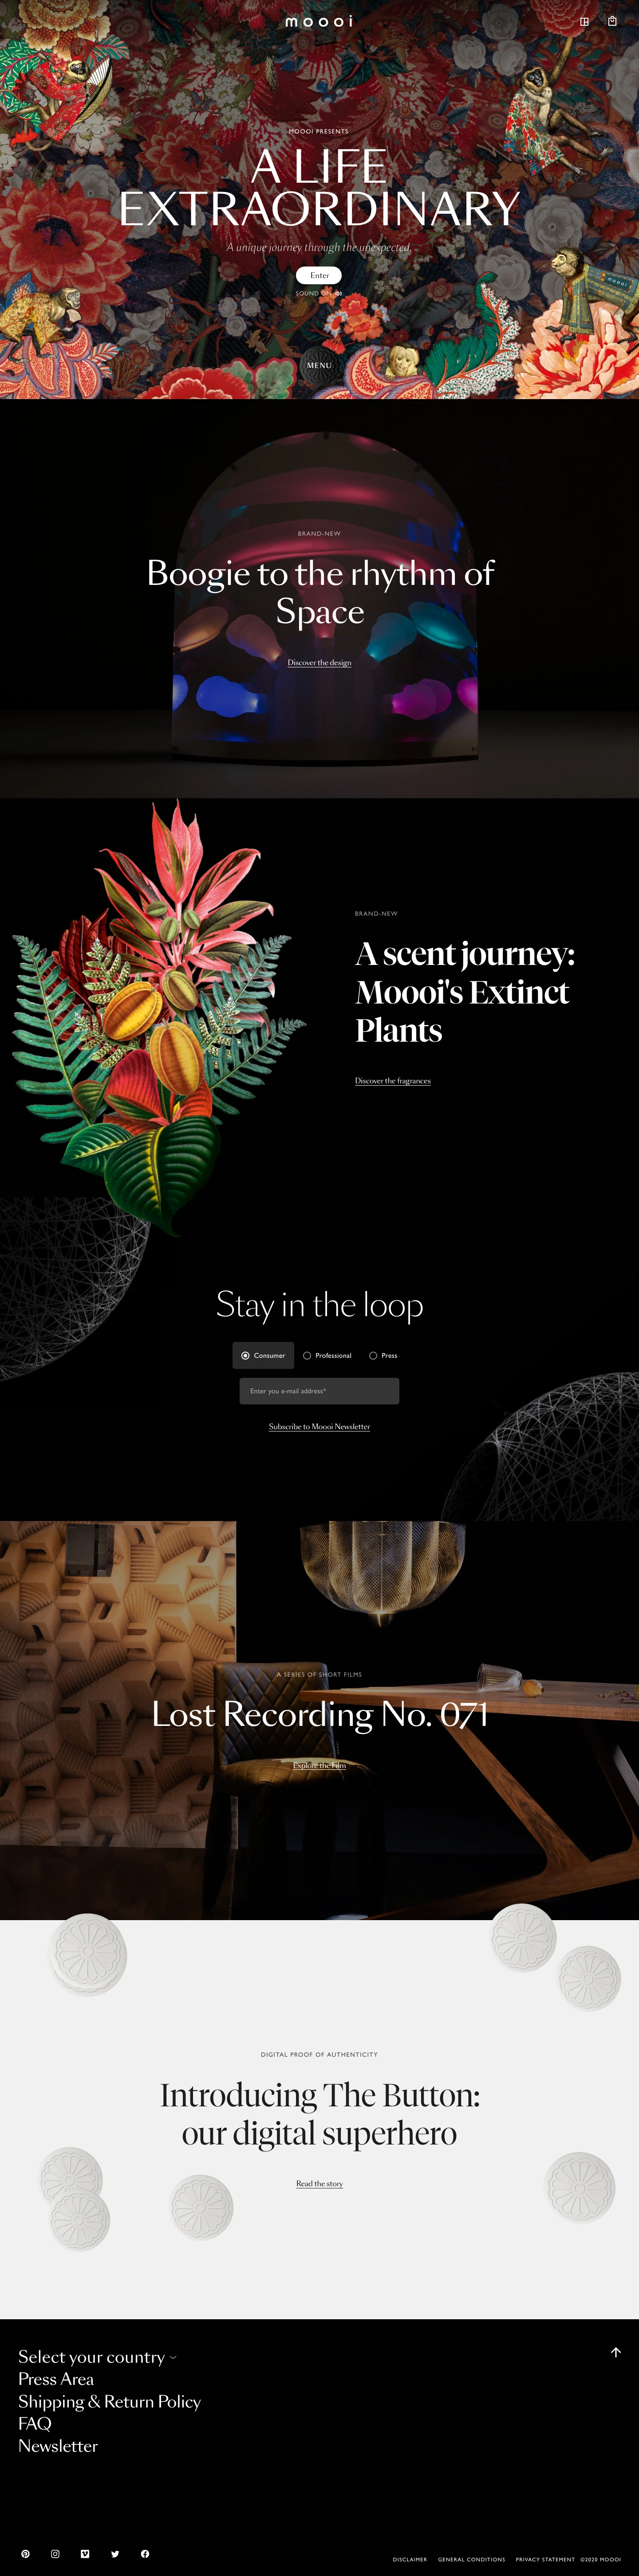 Moooi Landing Page Example: Moooi presents creative luxury for a well curated life. Innovative, provocative & poetic at the same time. A life extraordinary!